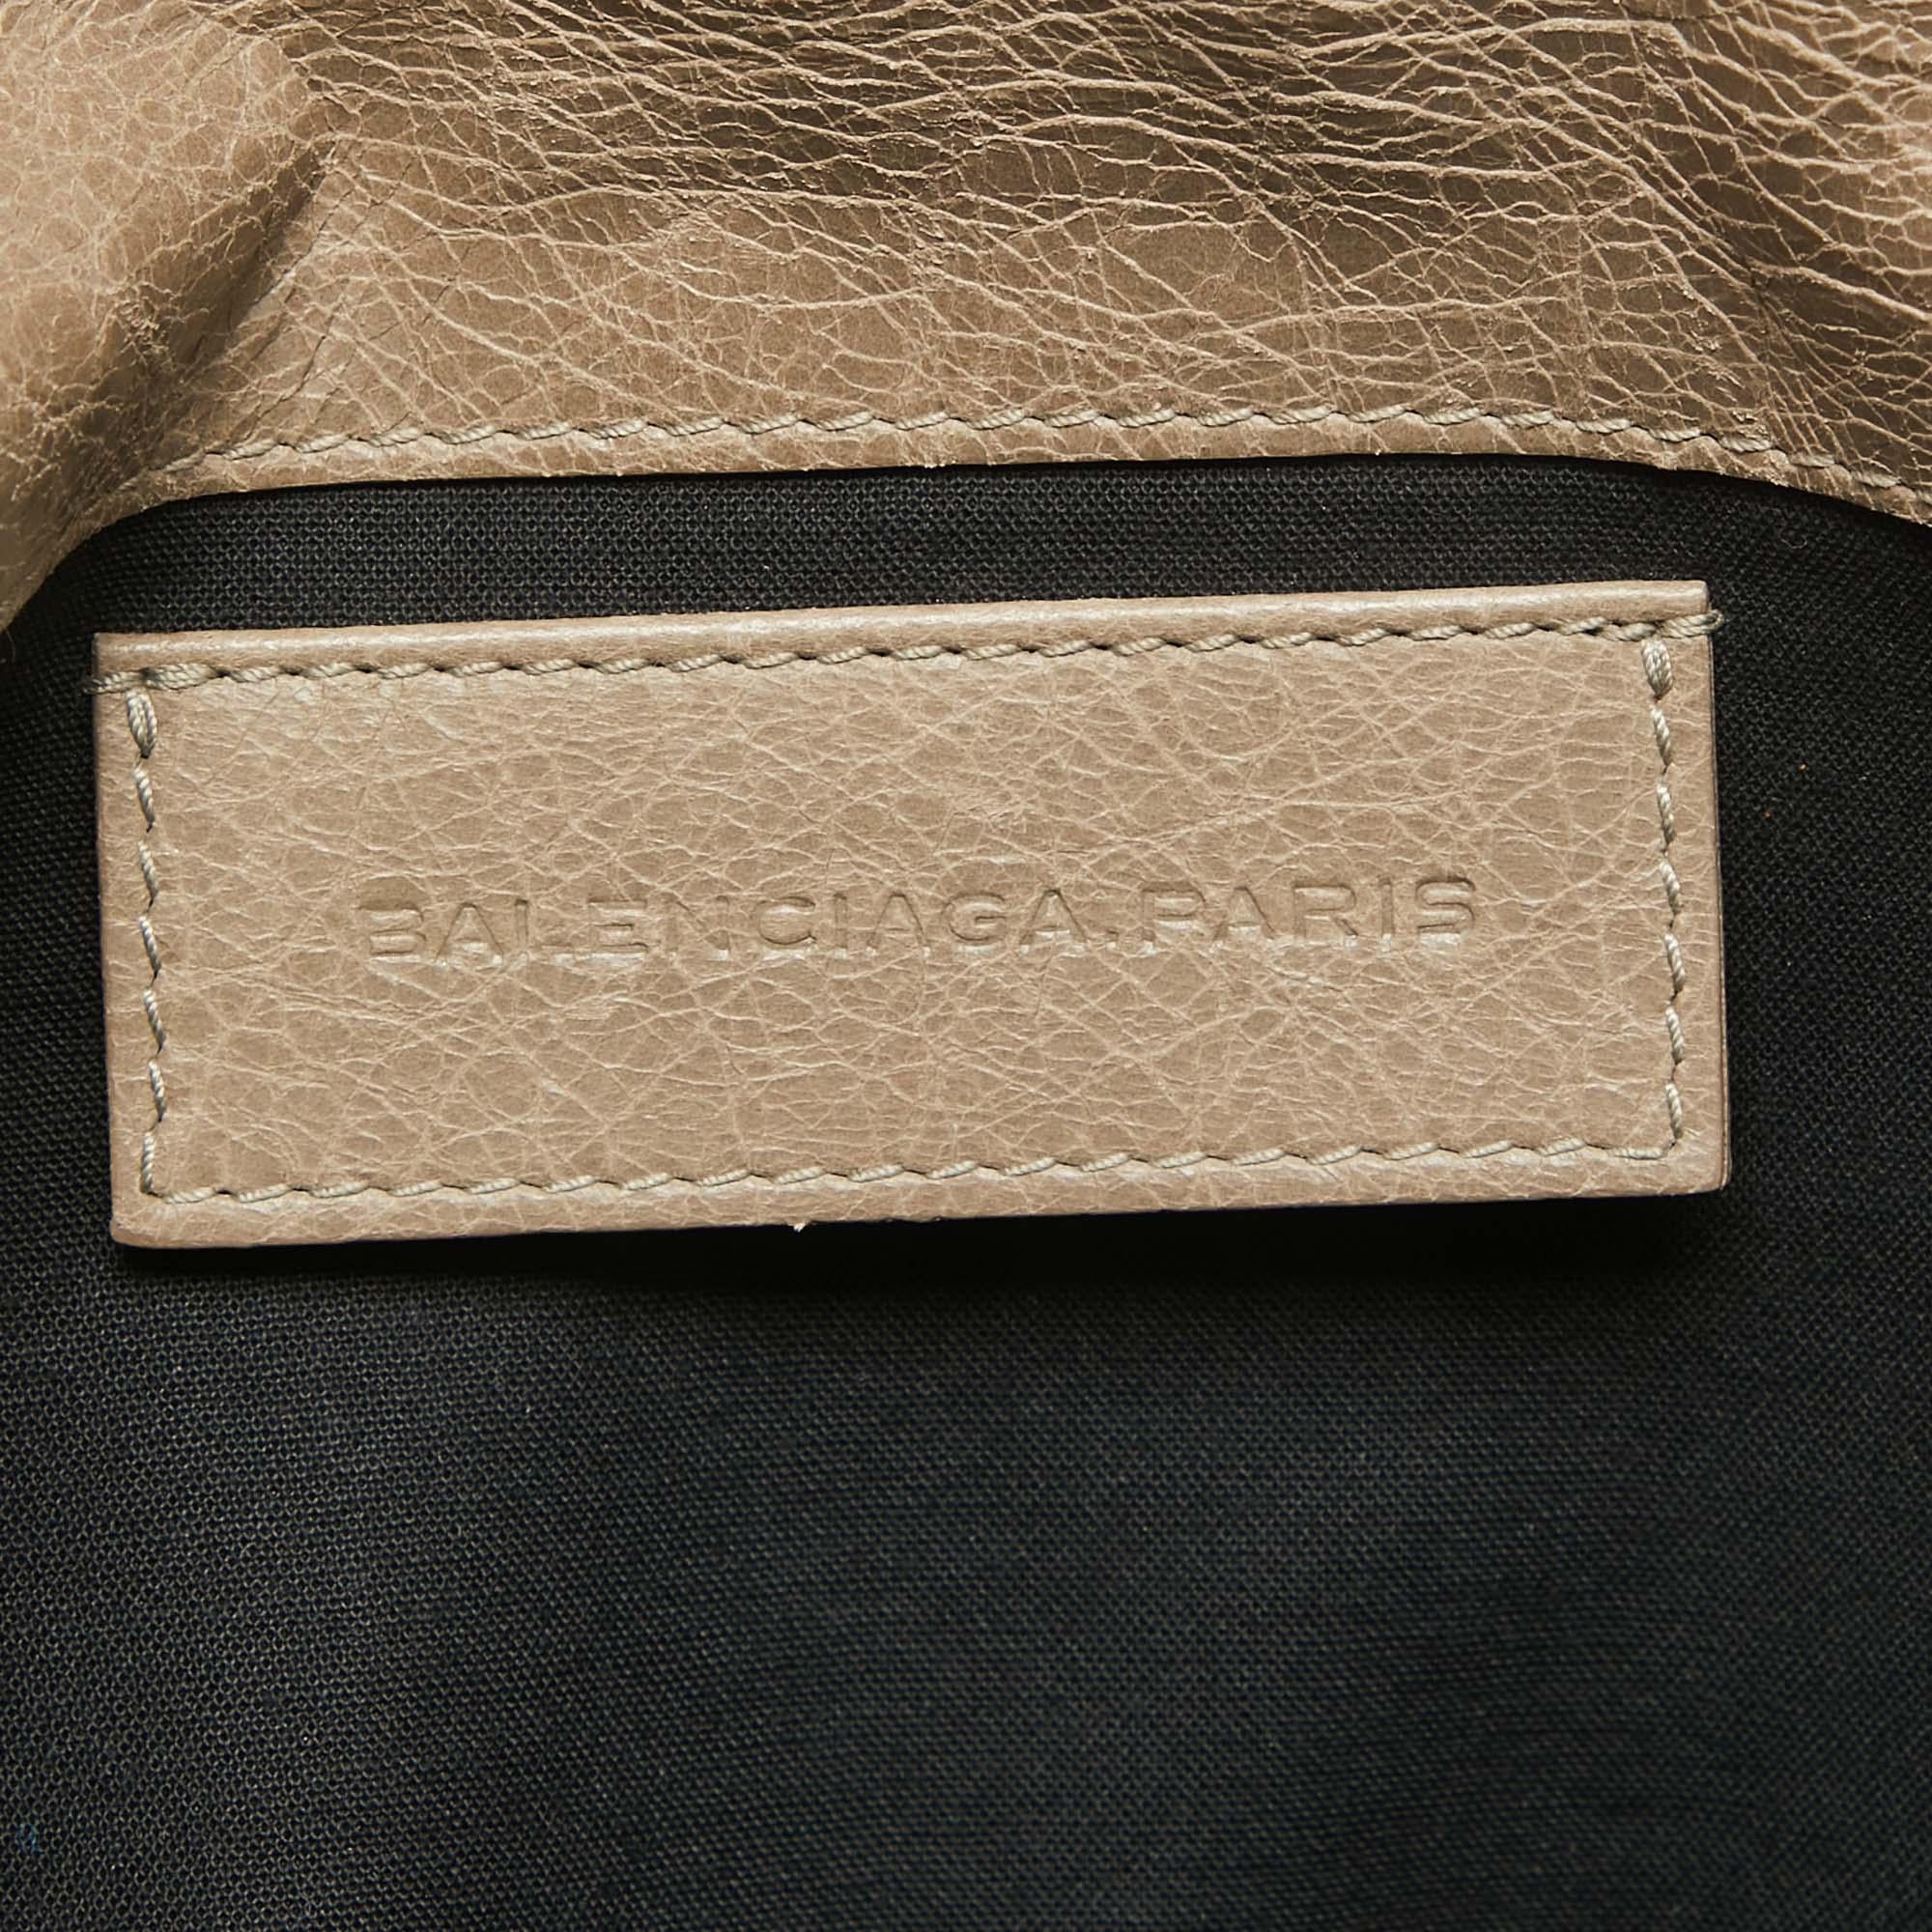 Balenciaga Beige Leather Classic Envelope Clutch For Sale 9